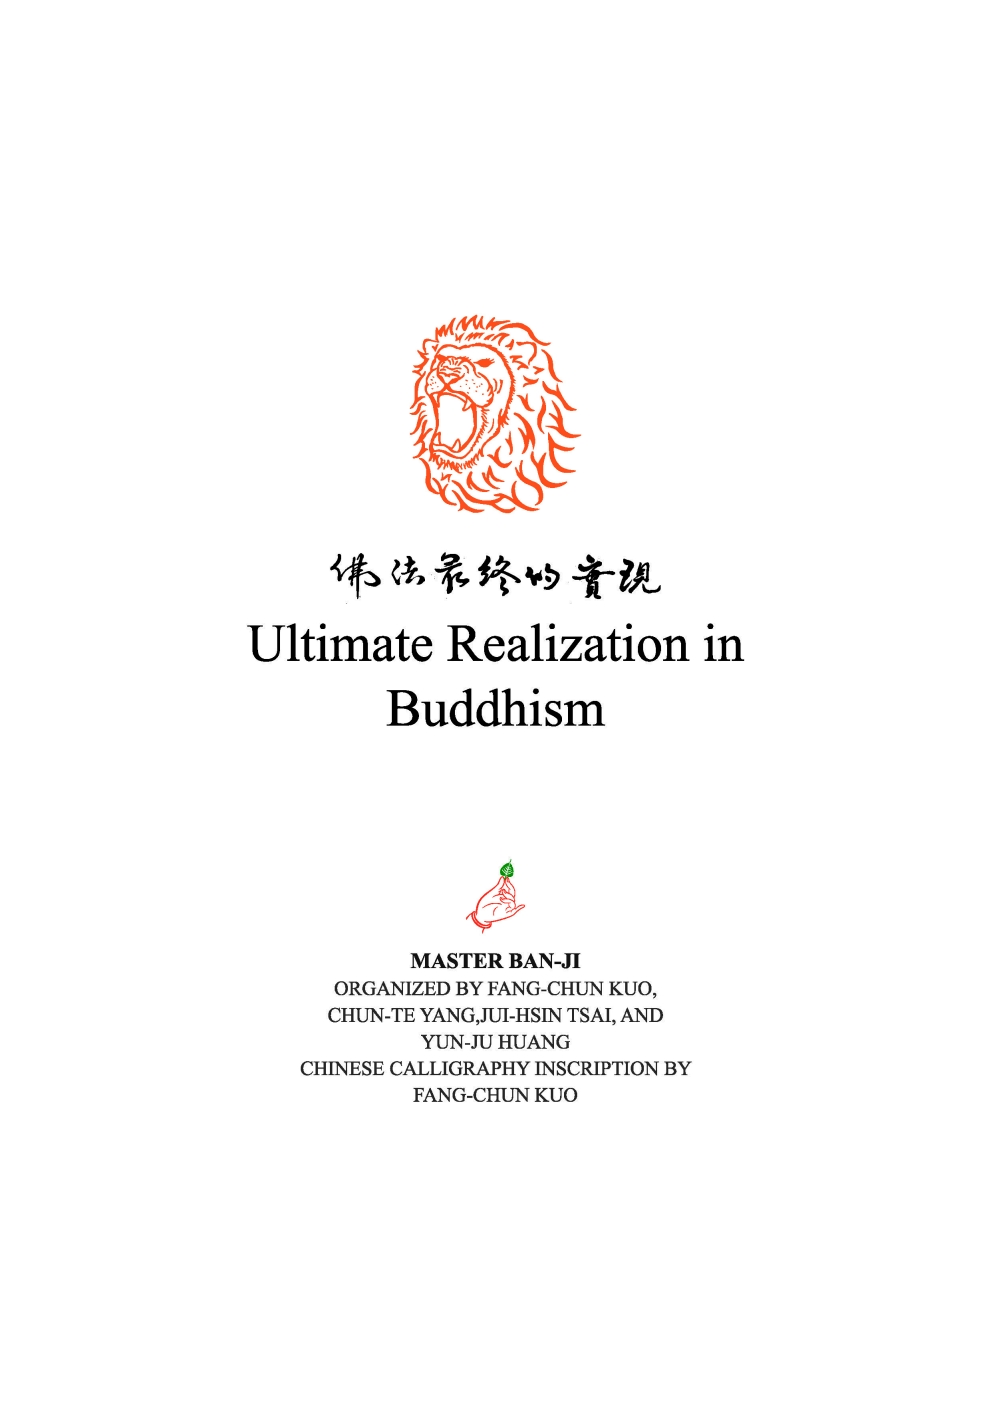 Ultimate Realization in Buddhism